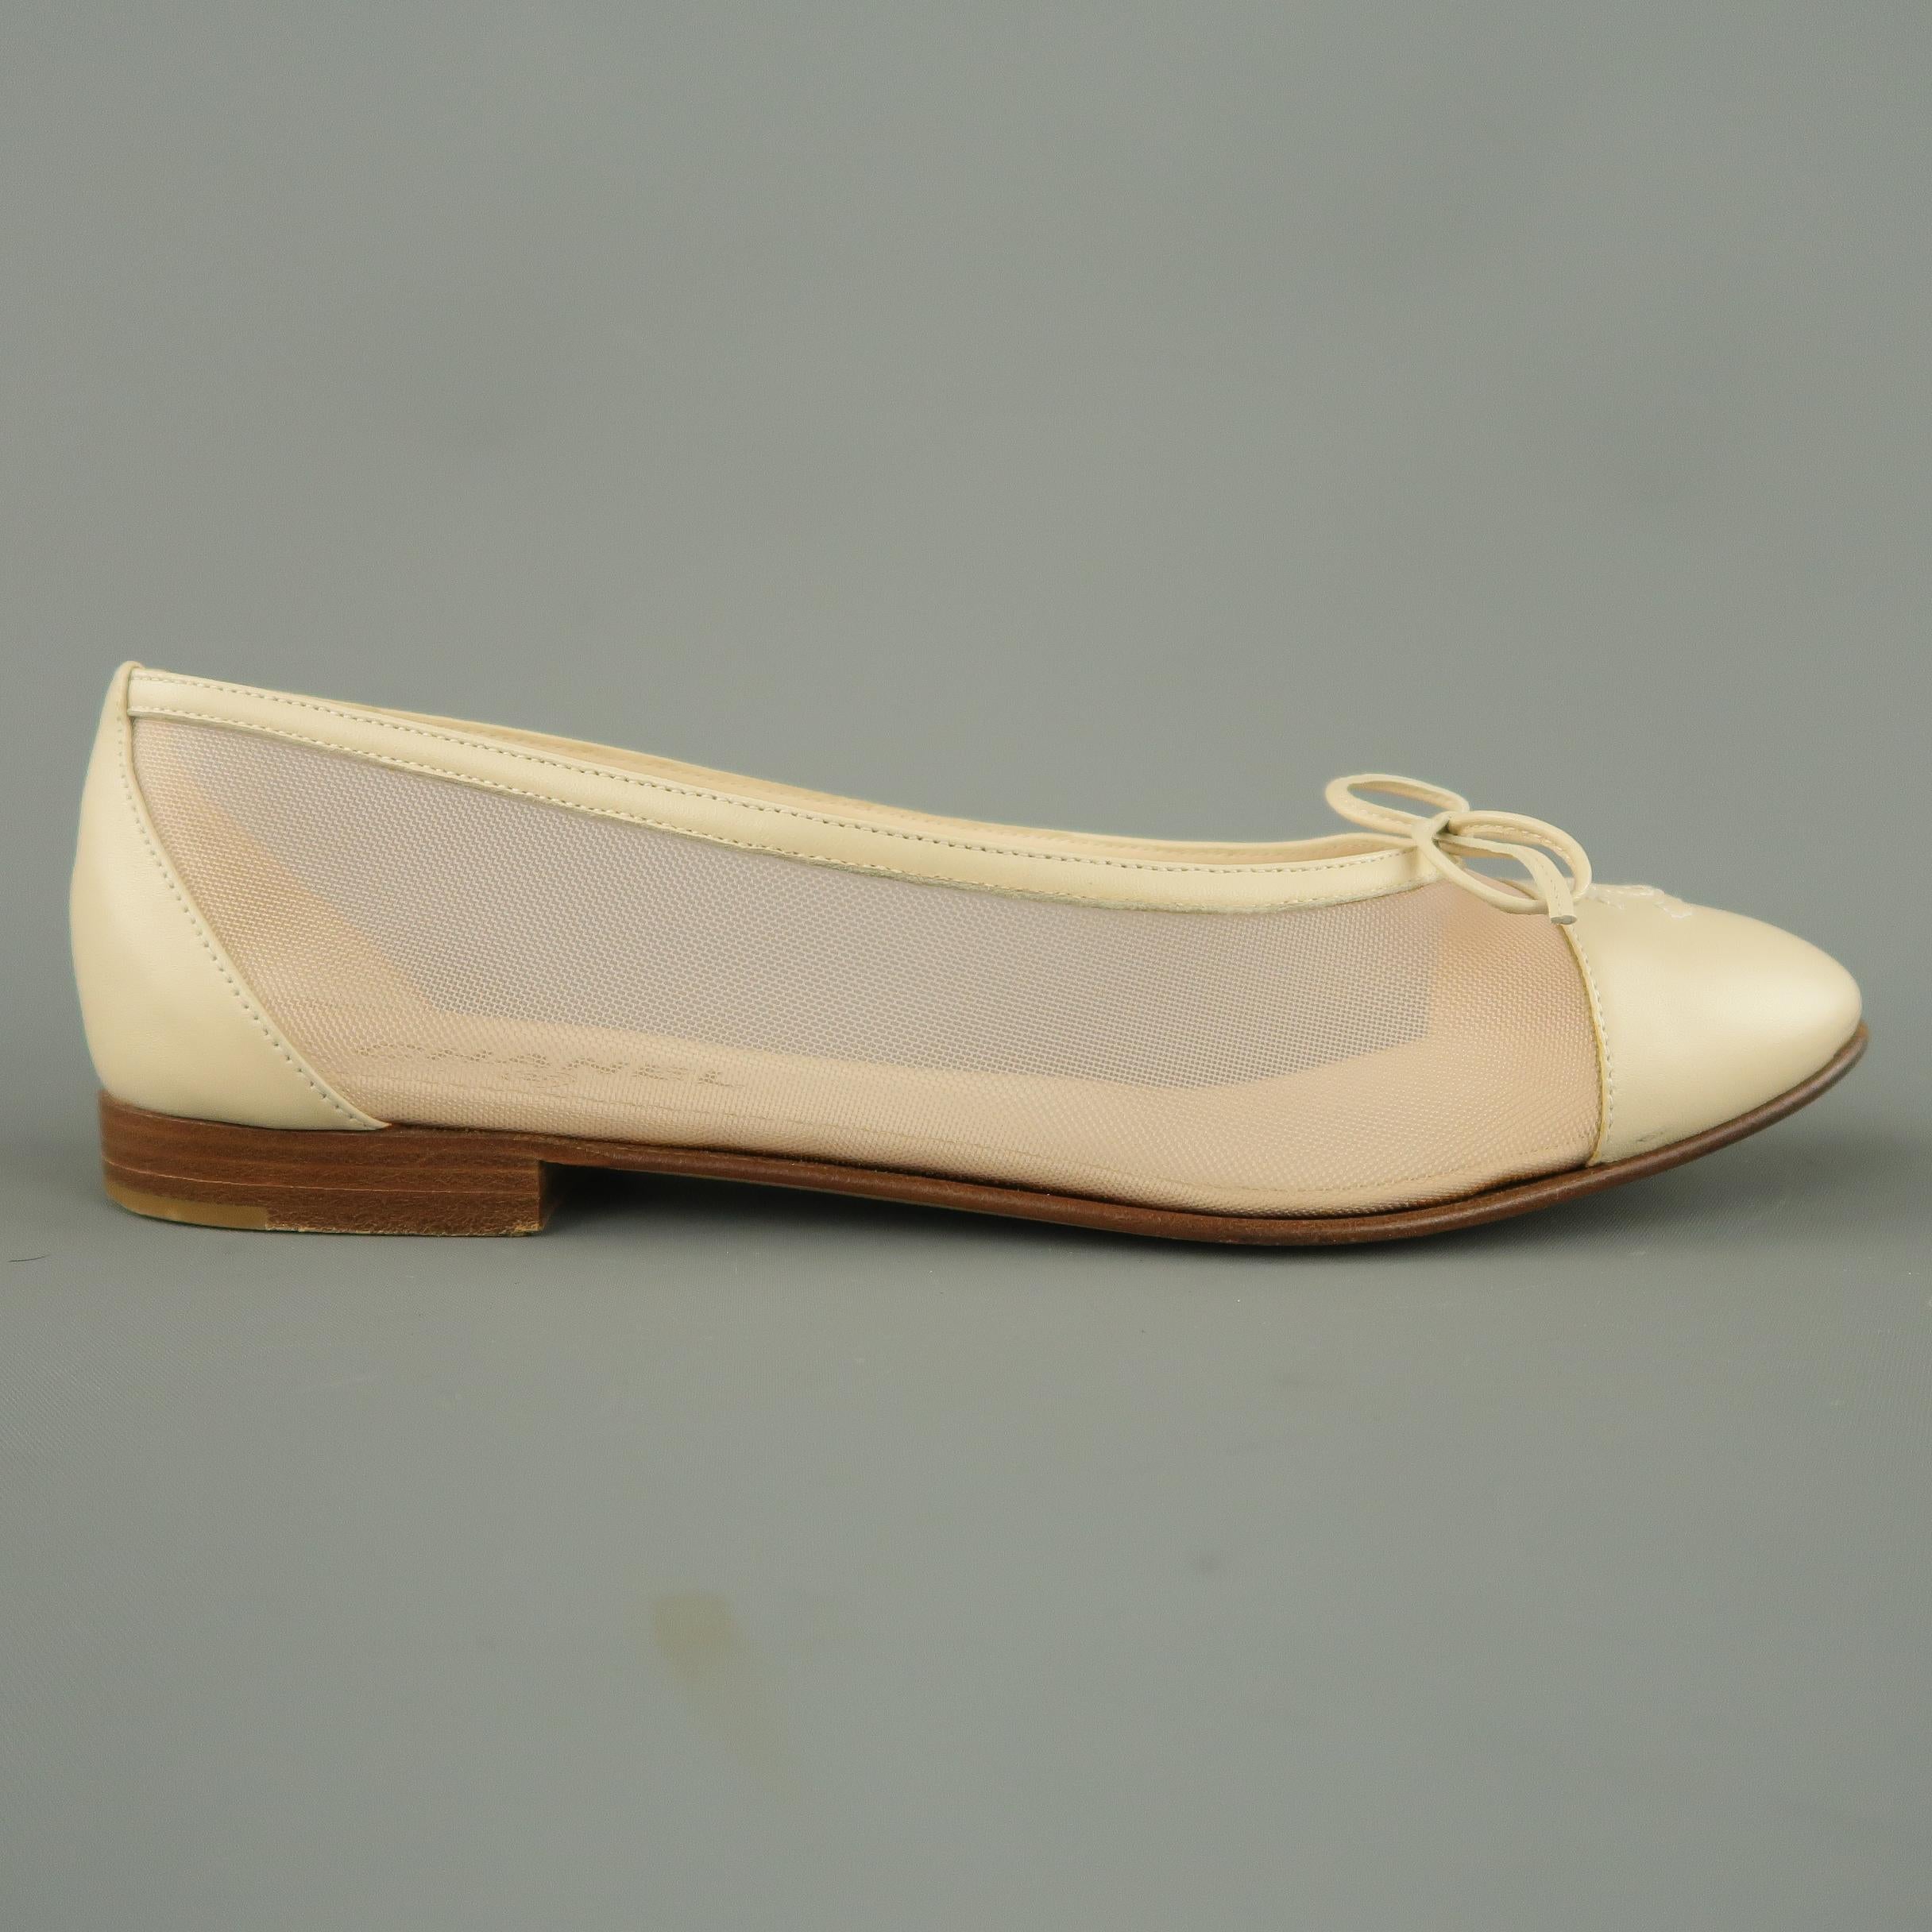 CHANEL Size 8.5 Beige Leather Pink Mesh CC Bow Cap Toe Flats 1